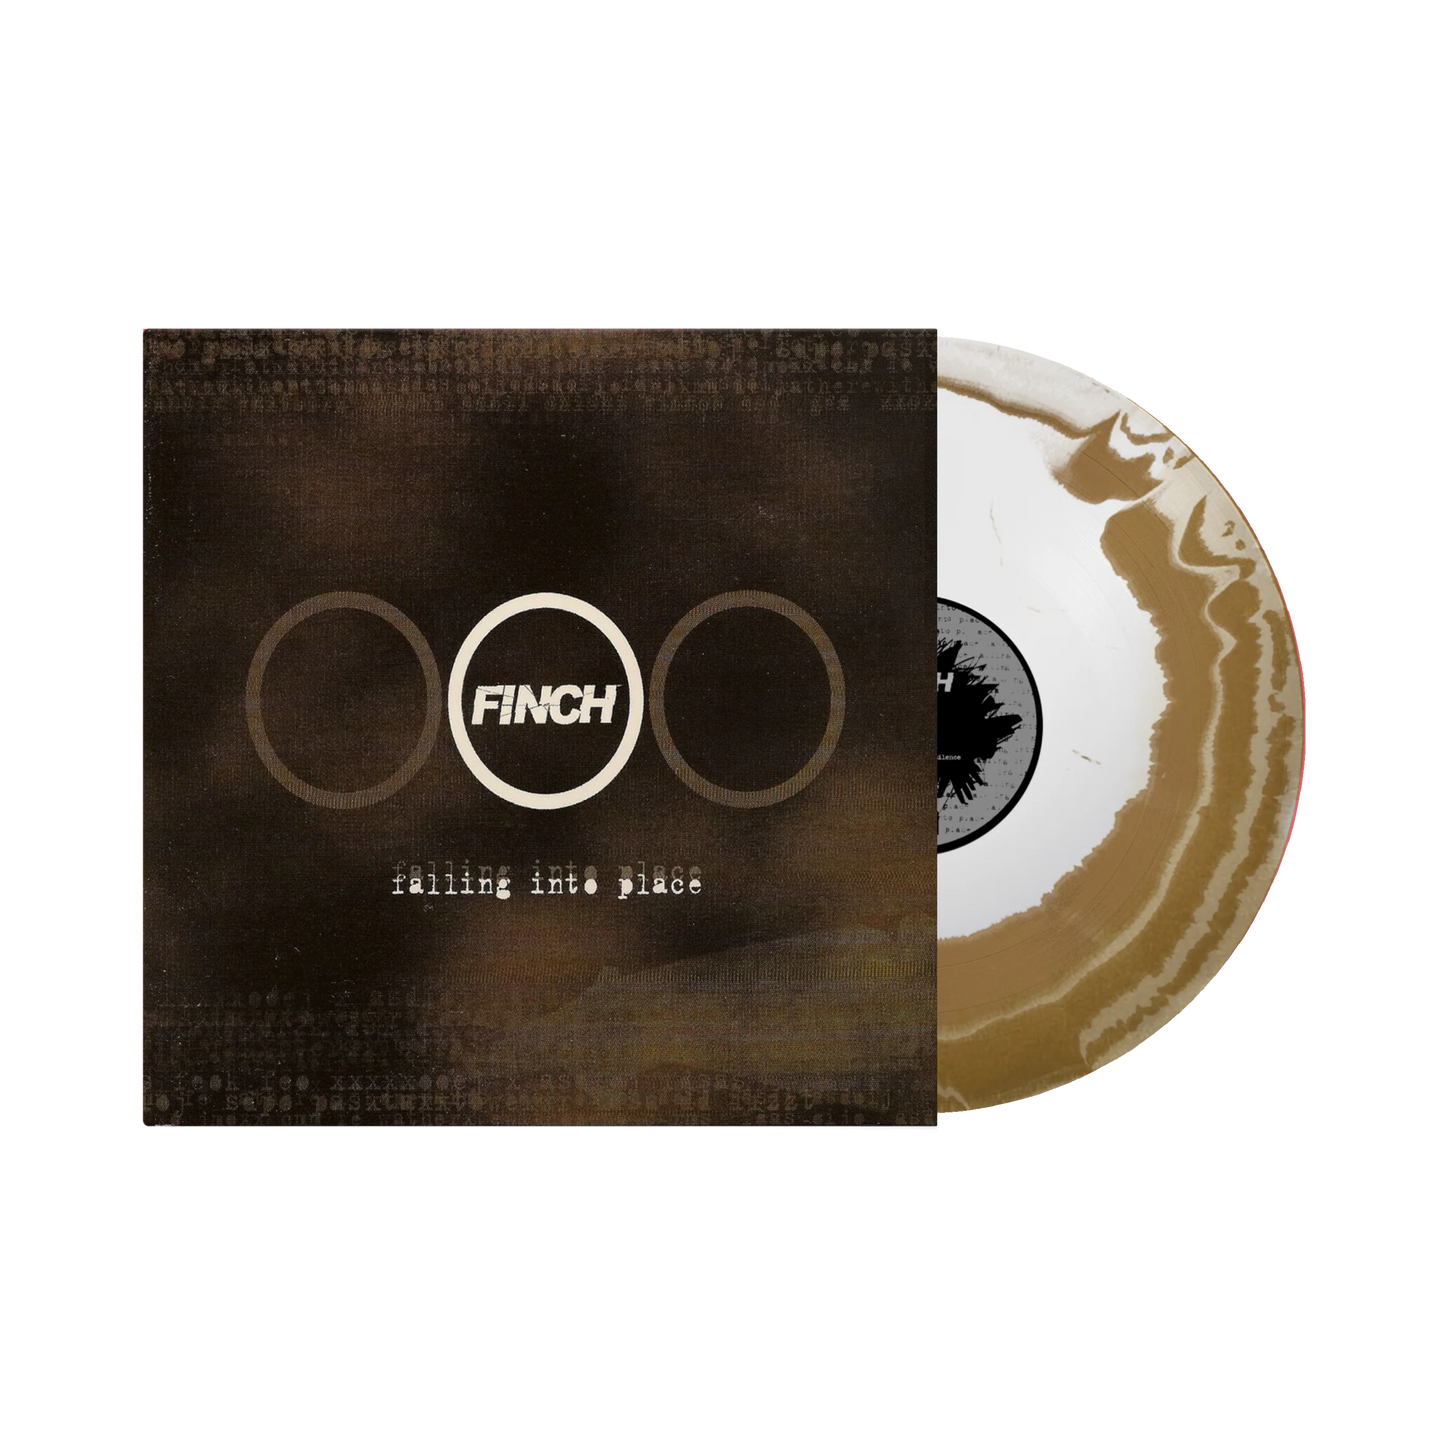 Finch "Falling Into Place" EP